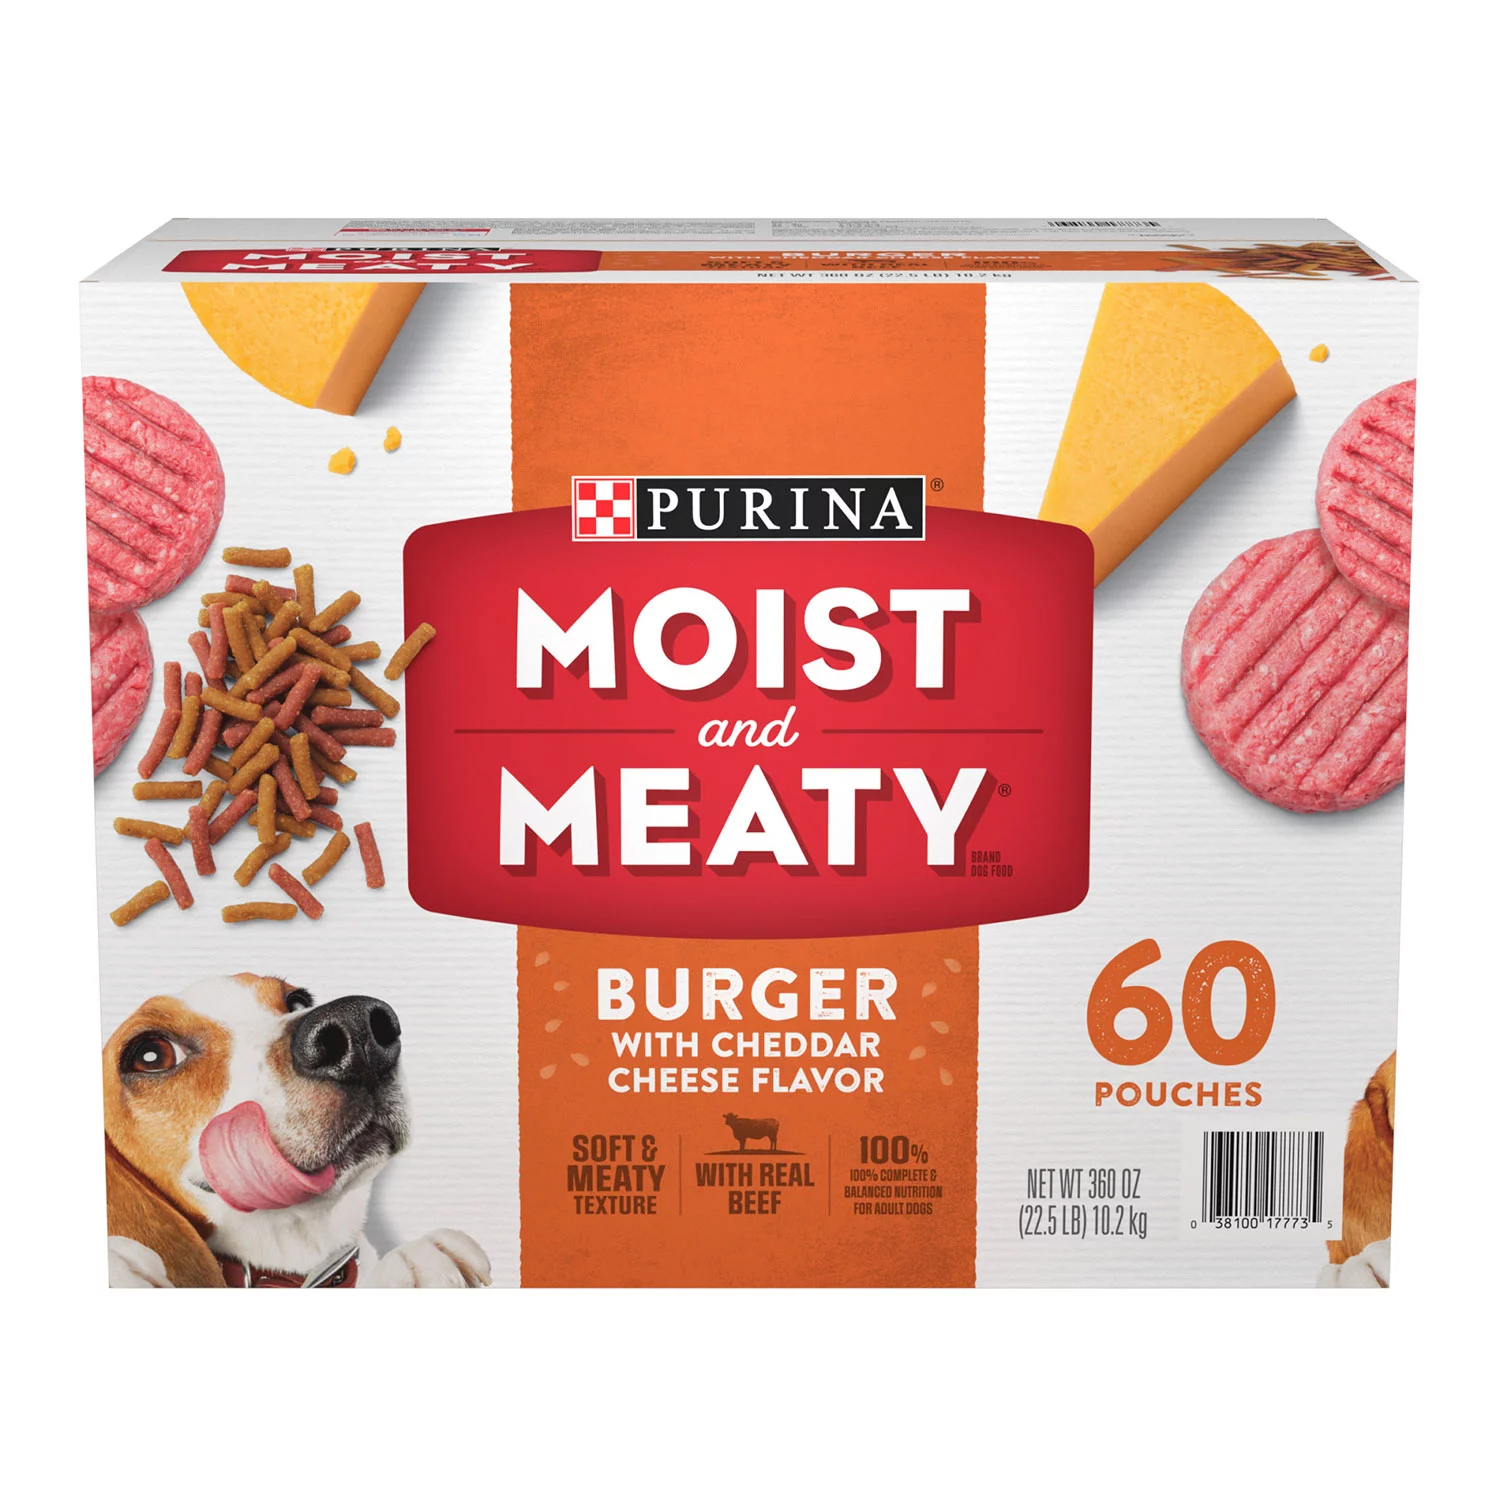 Purina Moist and Meaty Dog Food, Burger w/ Cheddar Cheese Flavor, 6 oz., 60 ct.